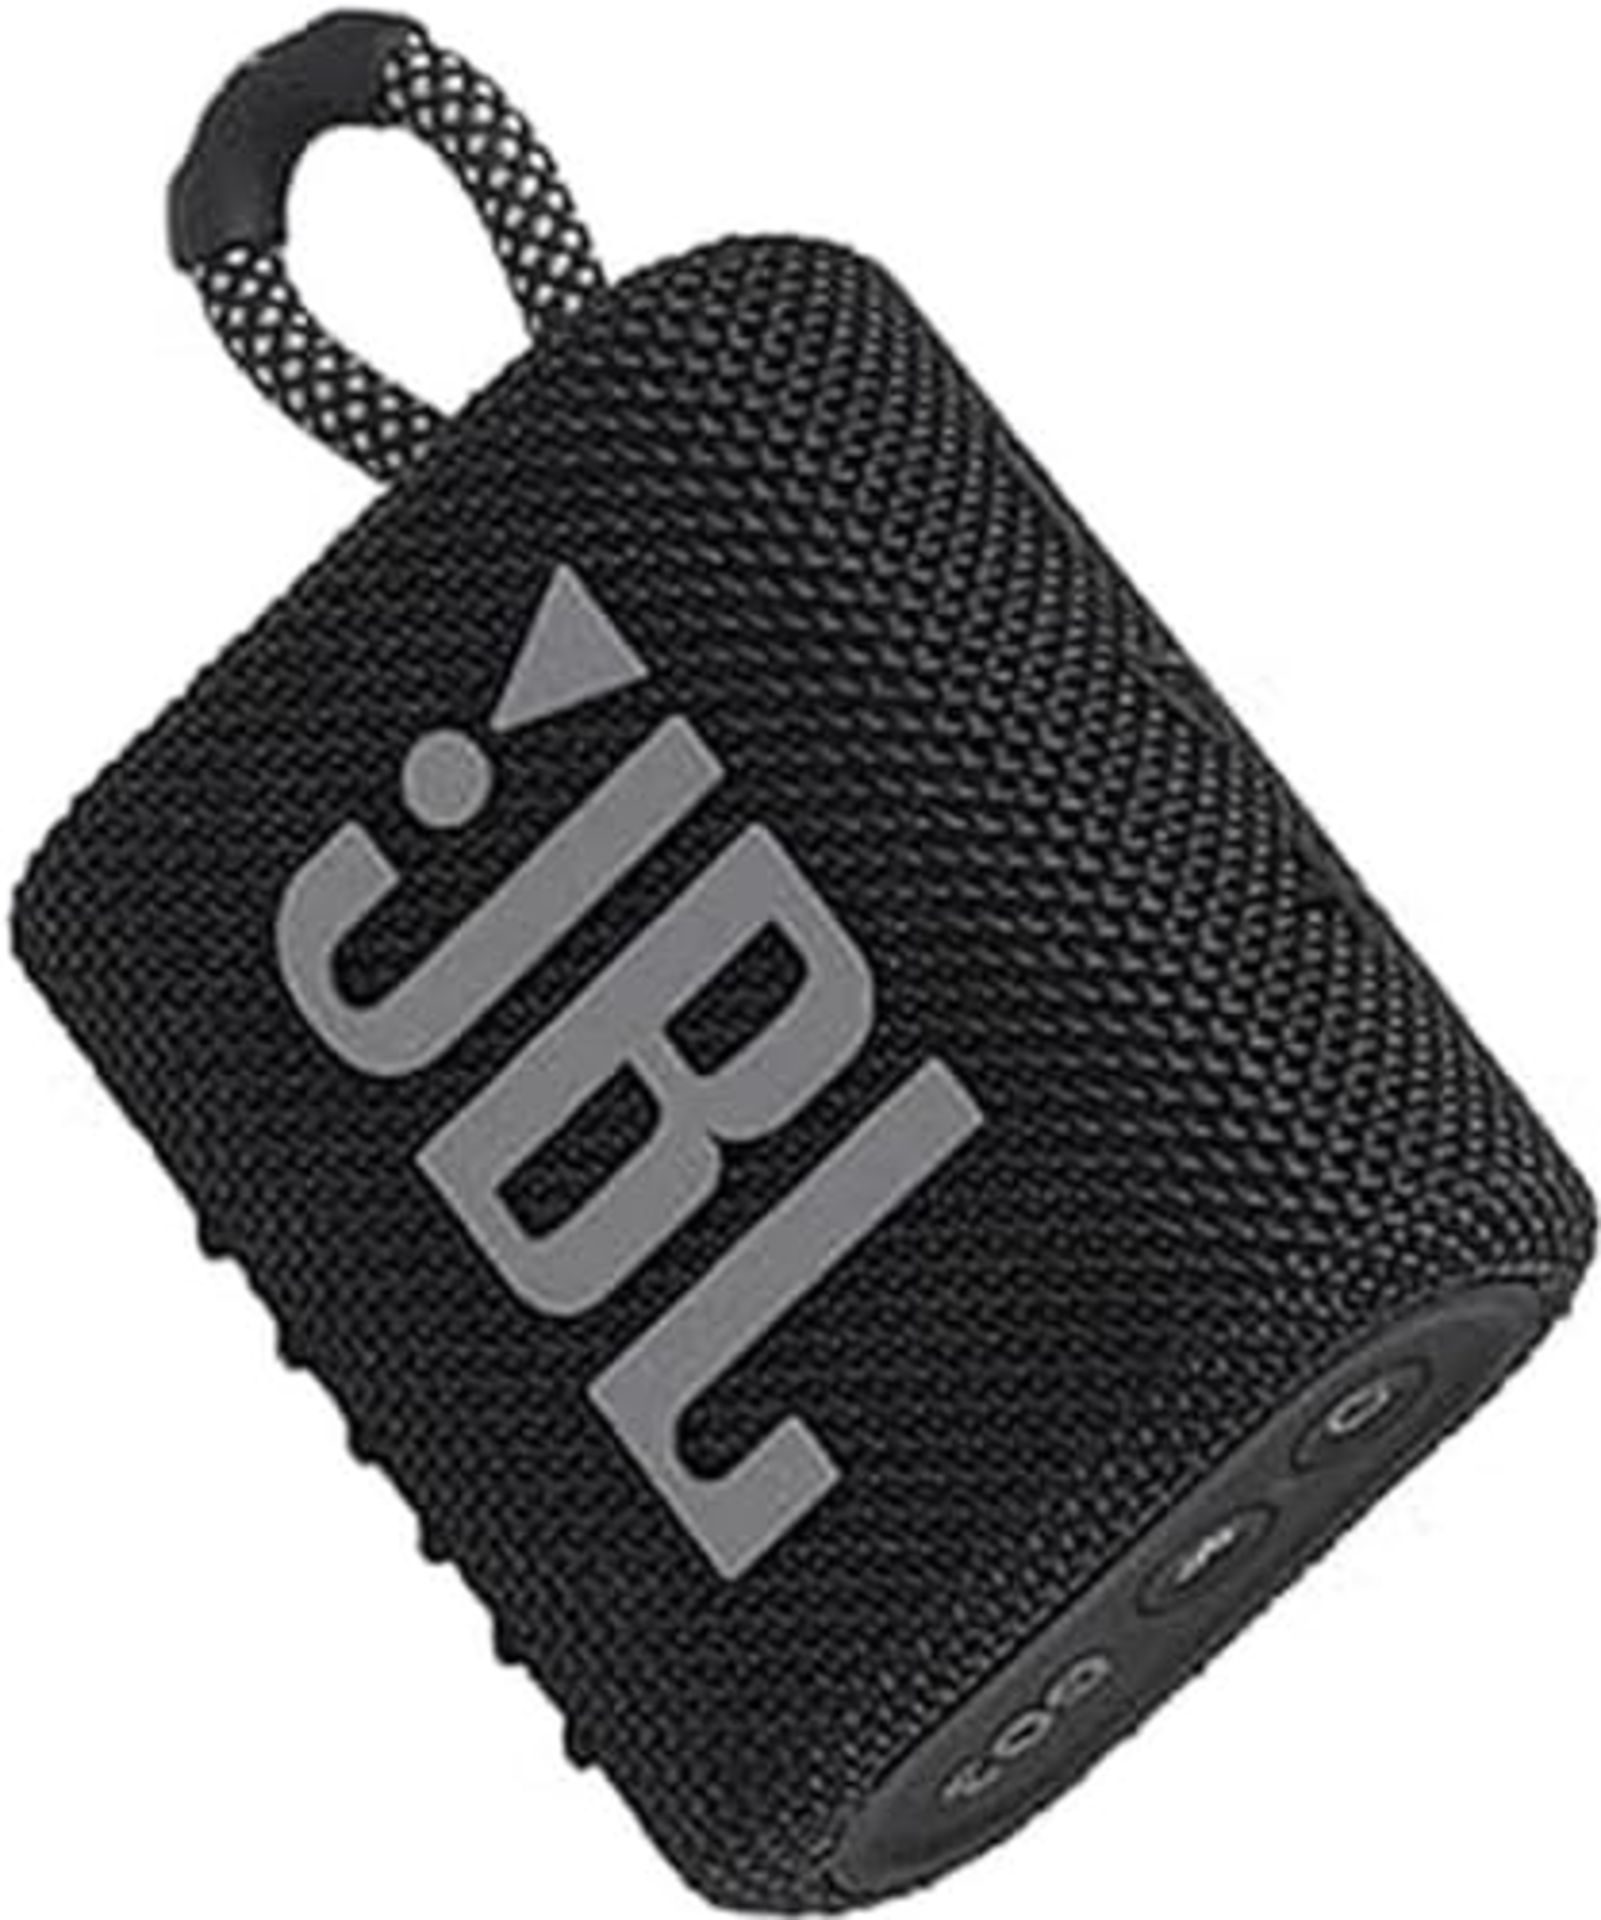 [NEW] JBL Go 3 - Portable and lightweight Bluetooth speaker, with intense bass and bol